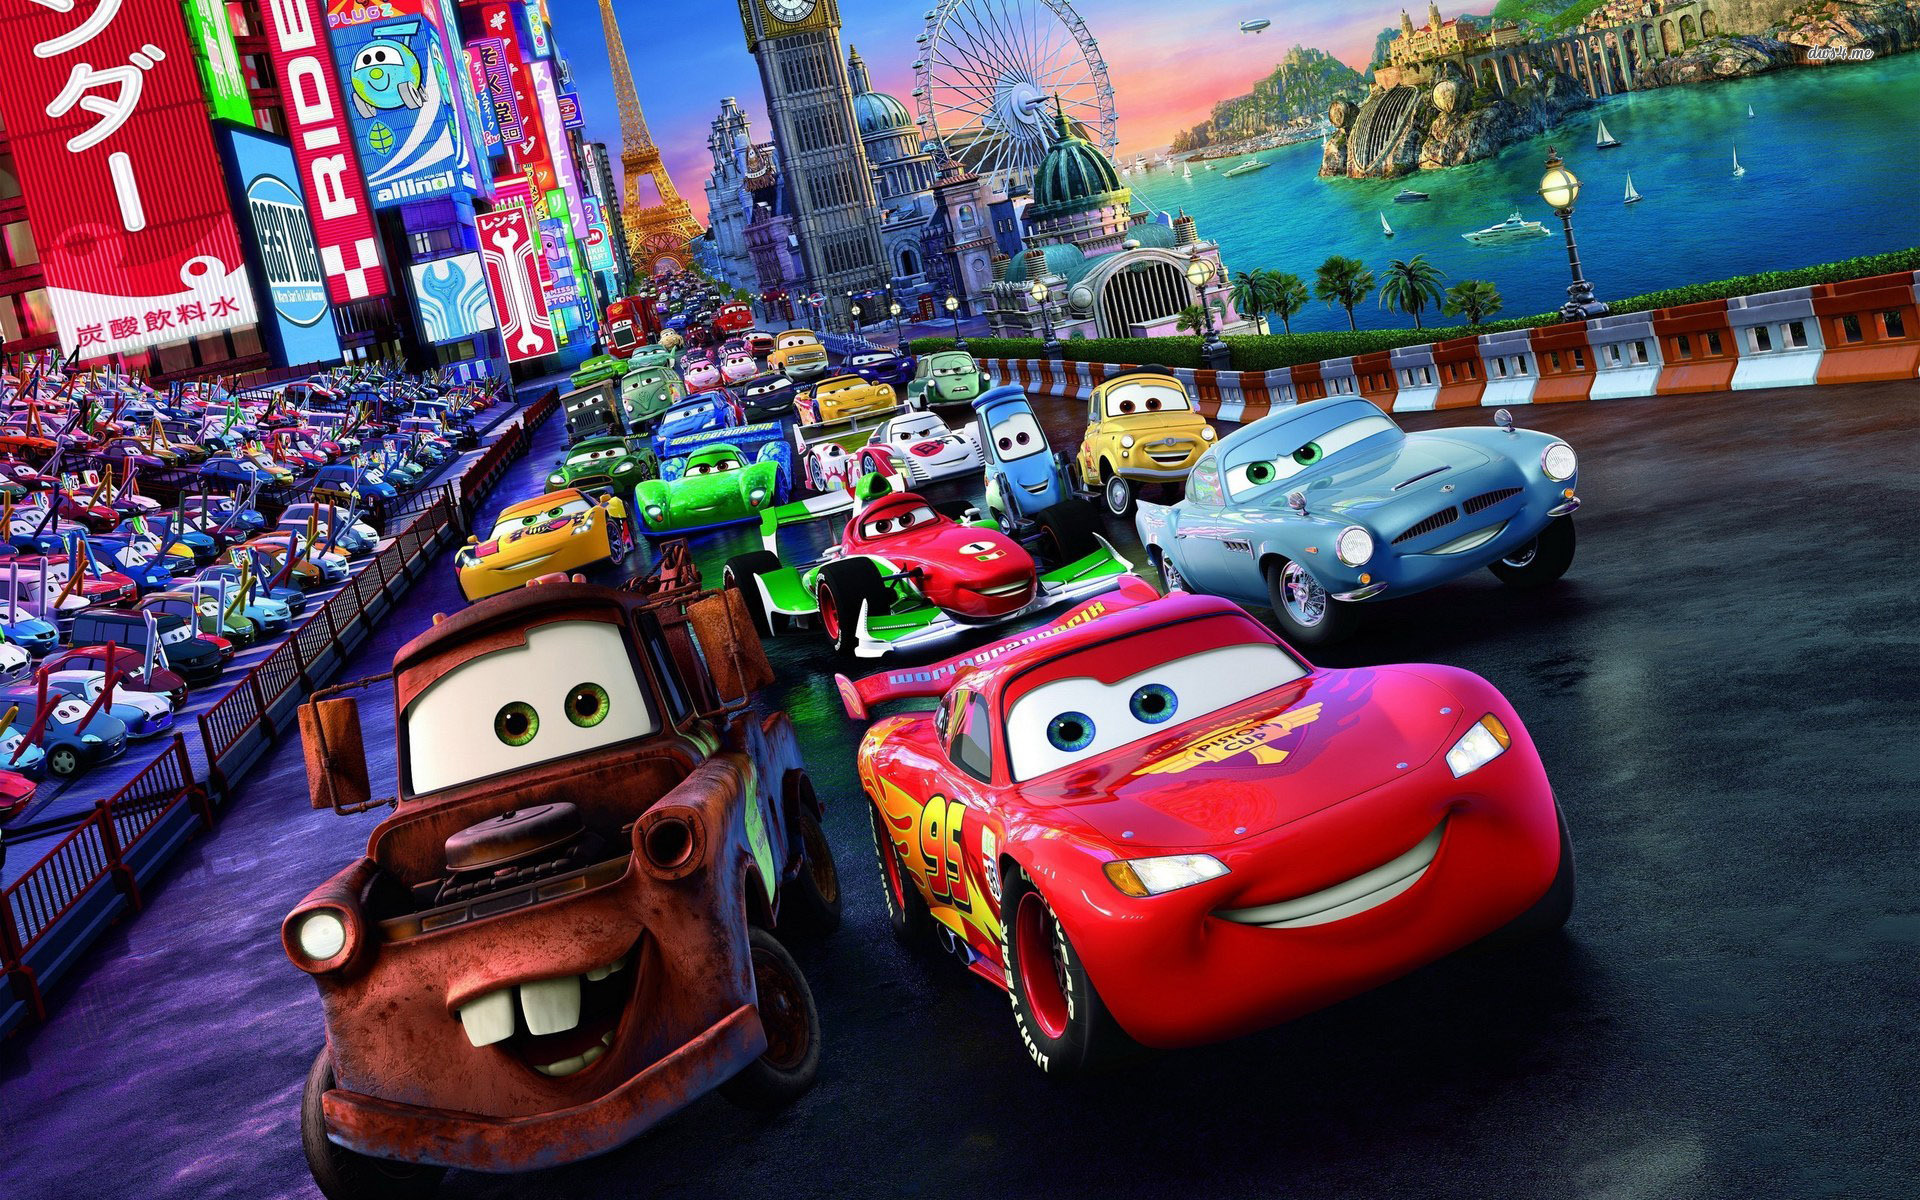 Movie Cars 2 HD Wallpaper | Background Image